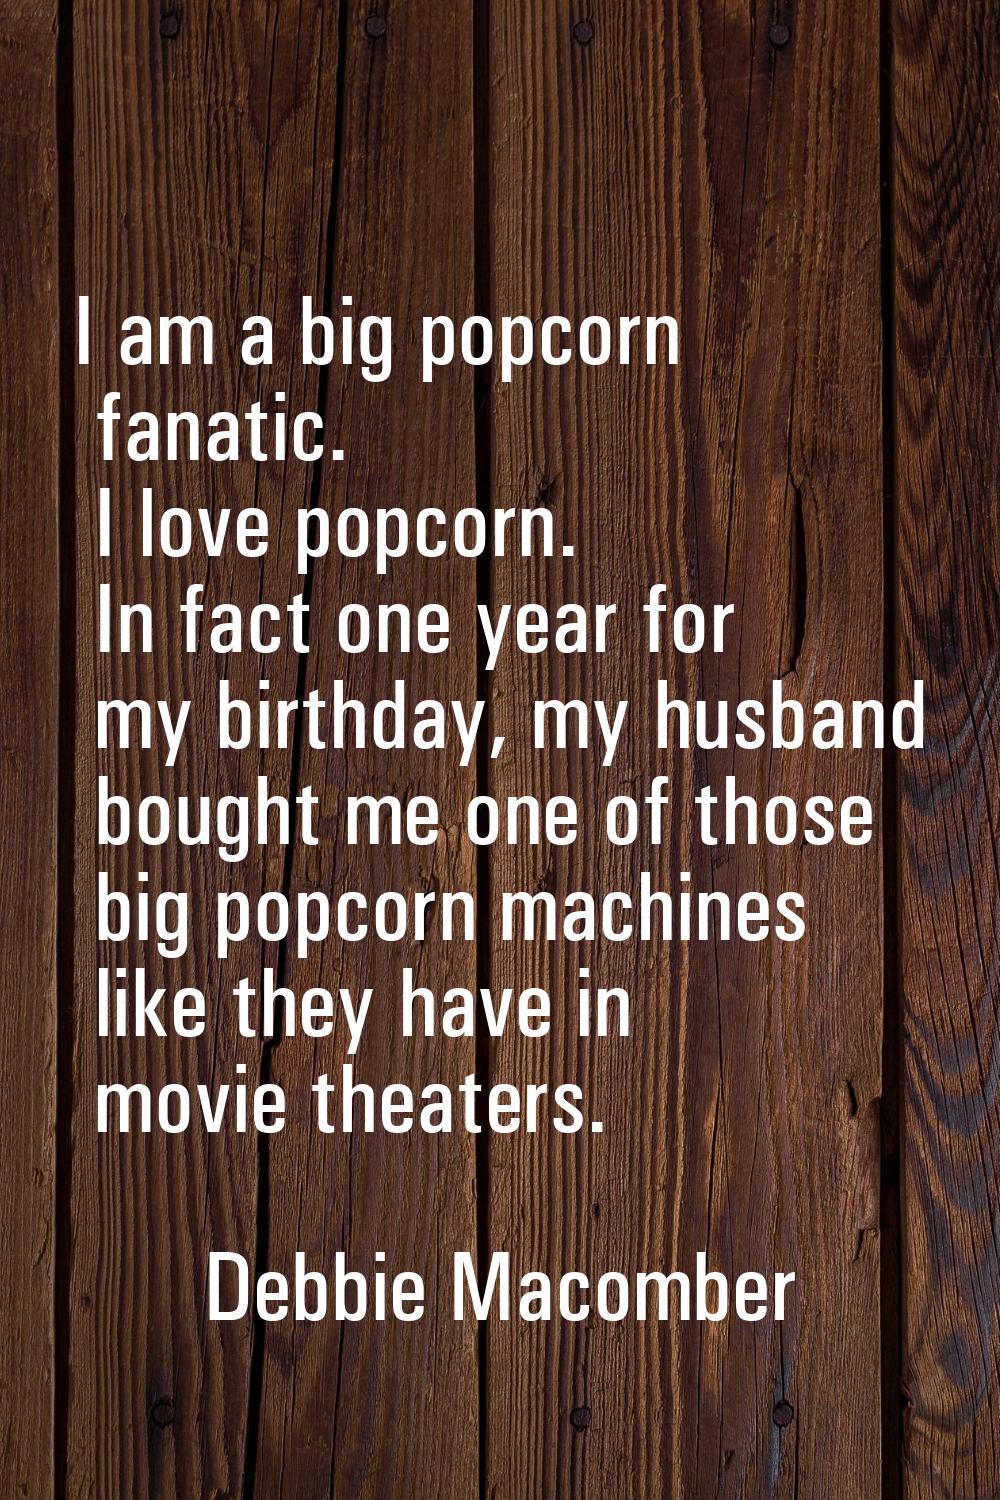 I am a big popcorn fanatic. I love popcorn. In fact one year for my birthday, my husband bought me 